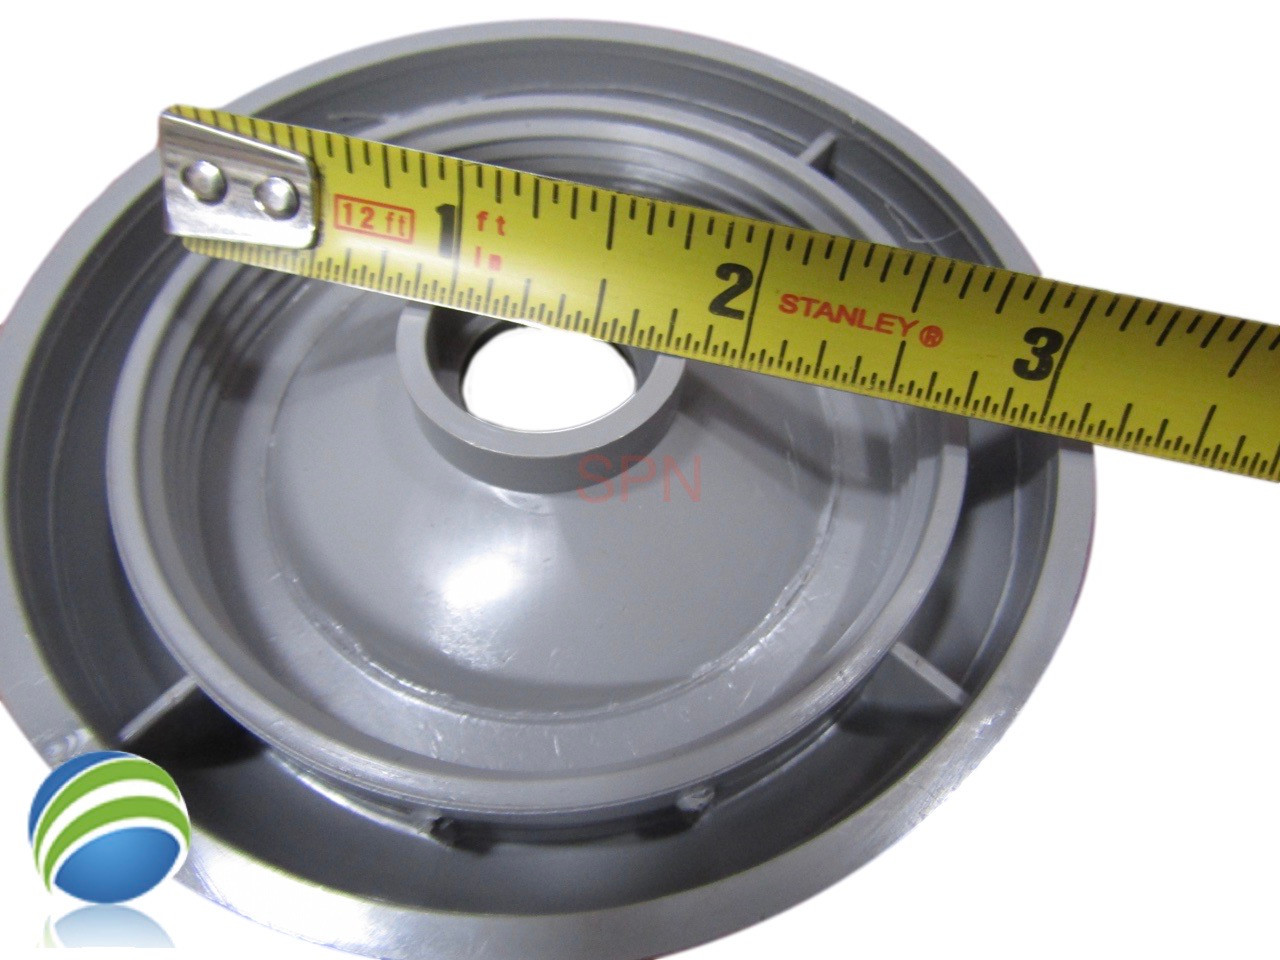 Spa Hot Tub Diverter Cap 3 3/4" Wide Gray Smooth 5 Scallop Non Buttress How To Video